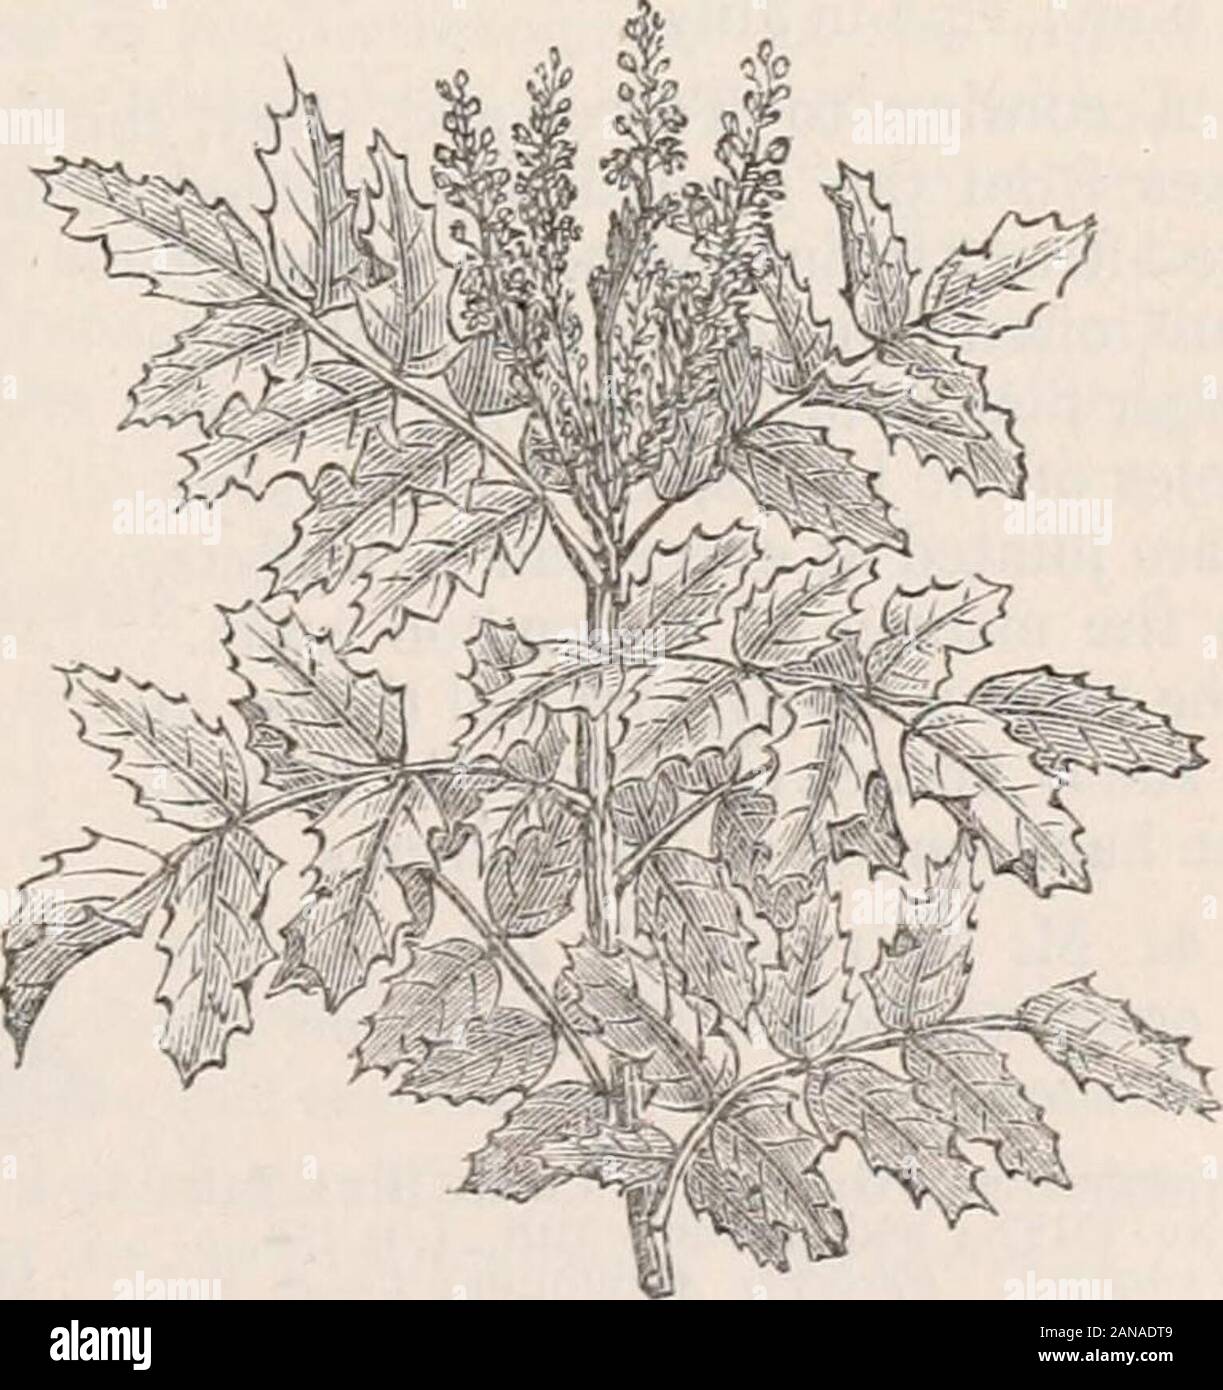 Trees and shrubs; an abridgment of the Arboretum et fruticetum britannicum: containing the hardy trees and shrubs of Britain, native and foreign, scientifically and popularly described; with their propagation, culture and uses and engravings of nearly all the species . p. 118. Synonyme. Berberis Jquif61iura Ph., Pen. Cyc., and Tor. S; Gray. Engravings. Pursh. Fl. Araer. Sept. 1.1. 4.; Bot. Reg., t. 1425.; and our fig. 73. Spec. Char., ^c. Leaves of 4 pairsof leaflets with an odd one, thelower pair distant from the baseof the petiole; leaflets ovate, ap-proximate, cordate at the base,one-nerved Stock Photo